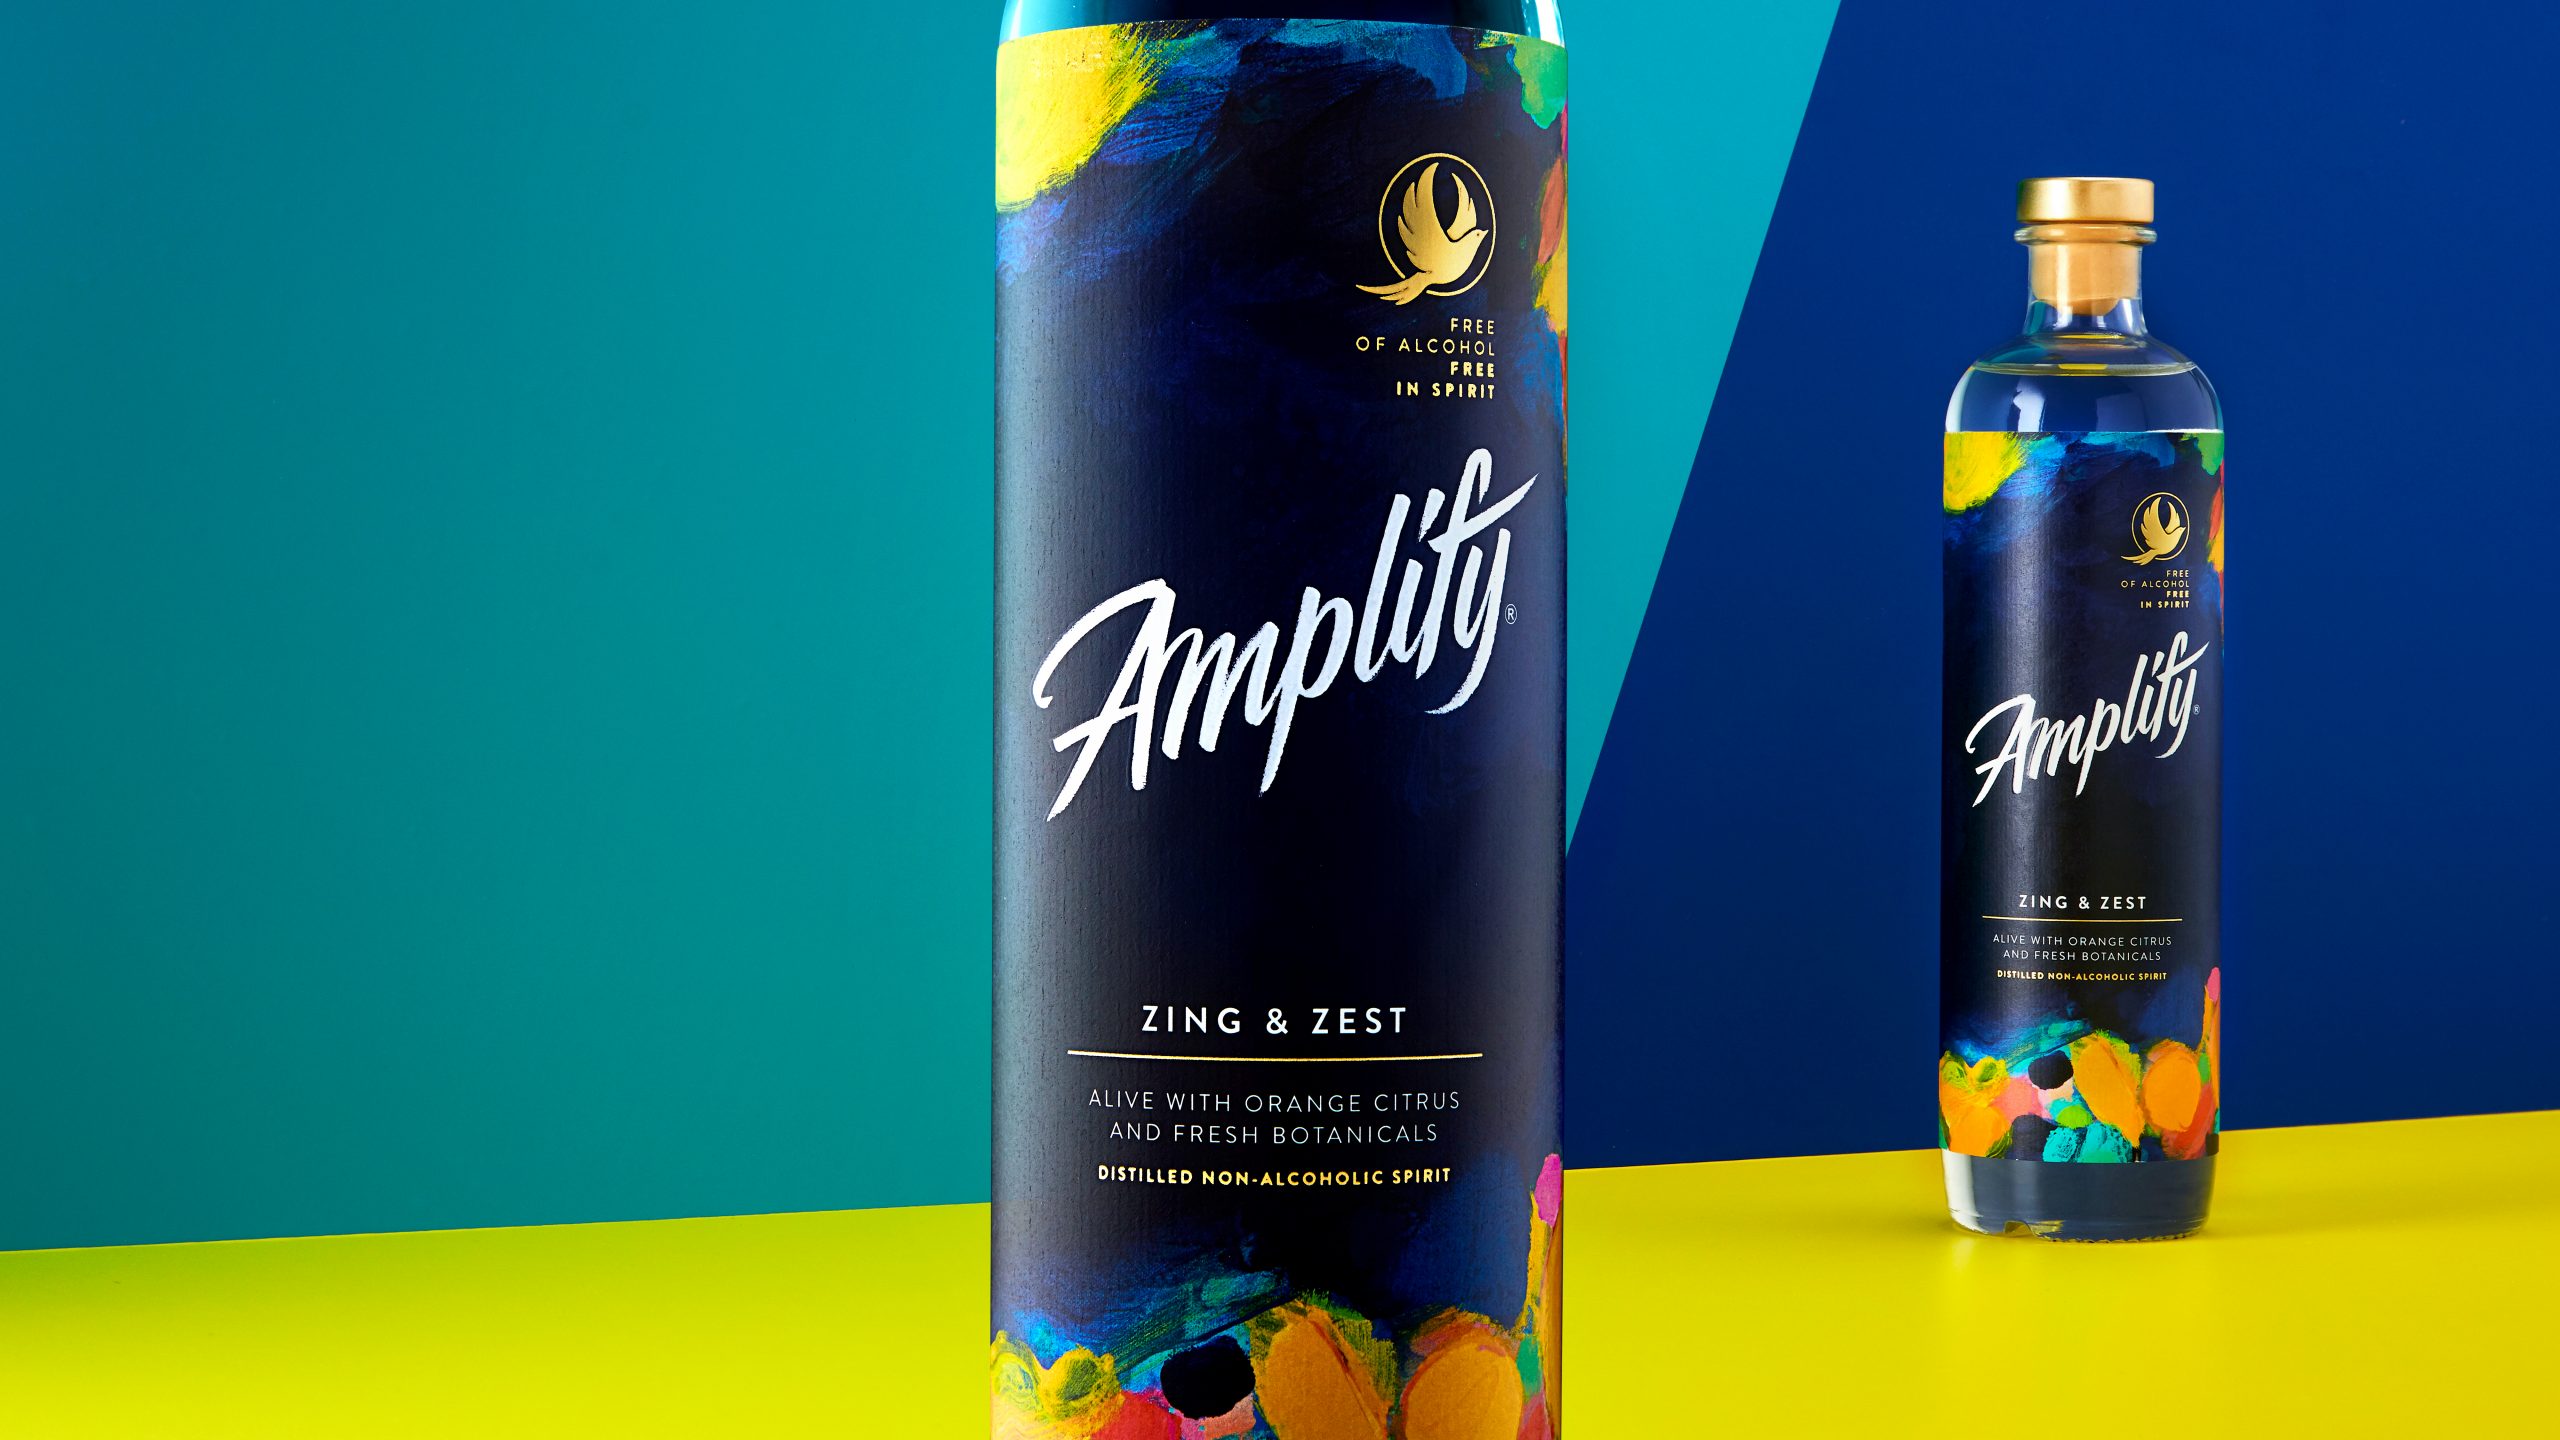 News: Elmwood Leeds Creates Amplify, a Bold, Playful New Zero-Alcohol Drinks Brand That is “Free of Alcohol, Free in Spirit.